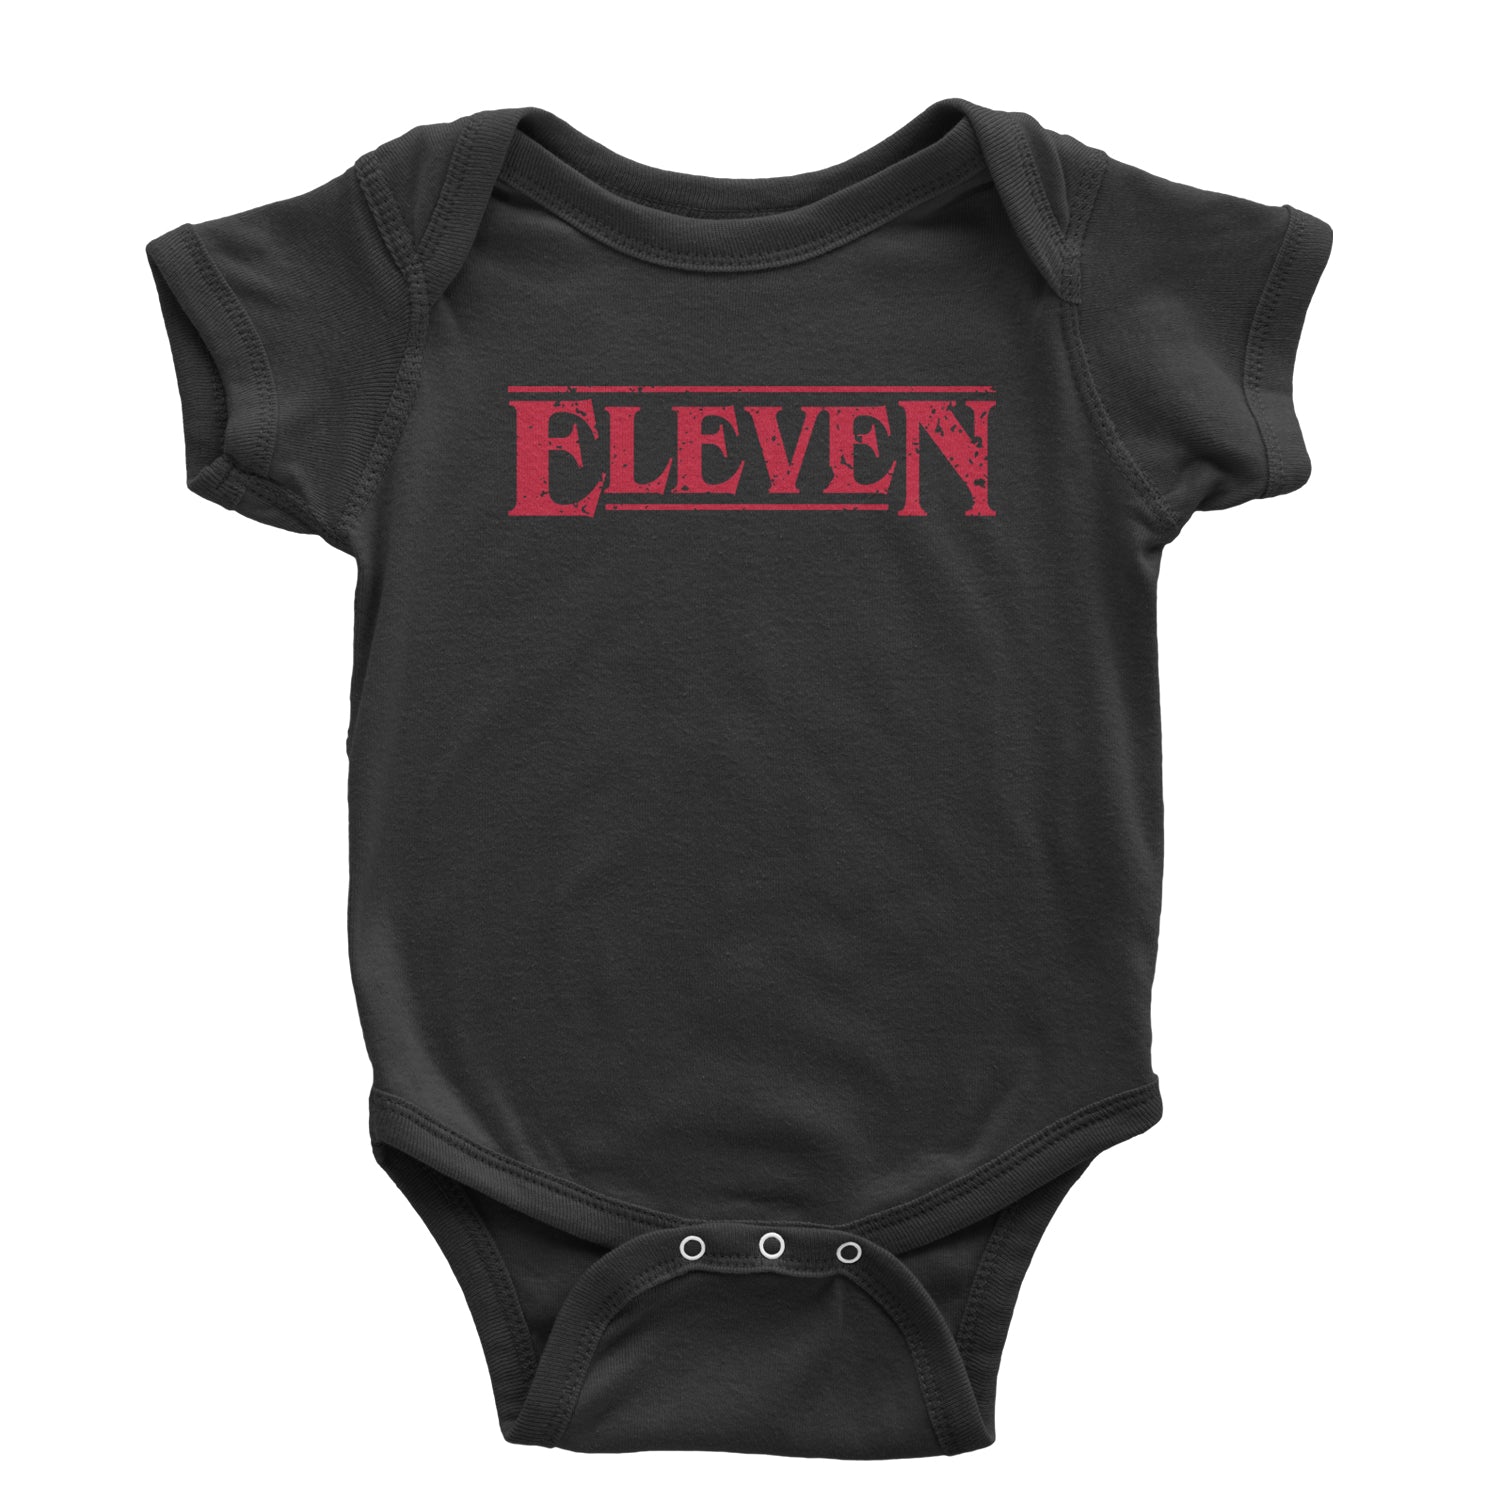 Eleven Infant One-Piece Romper Bodysuit and Toddler T-shirt